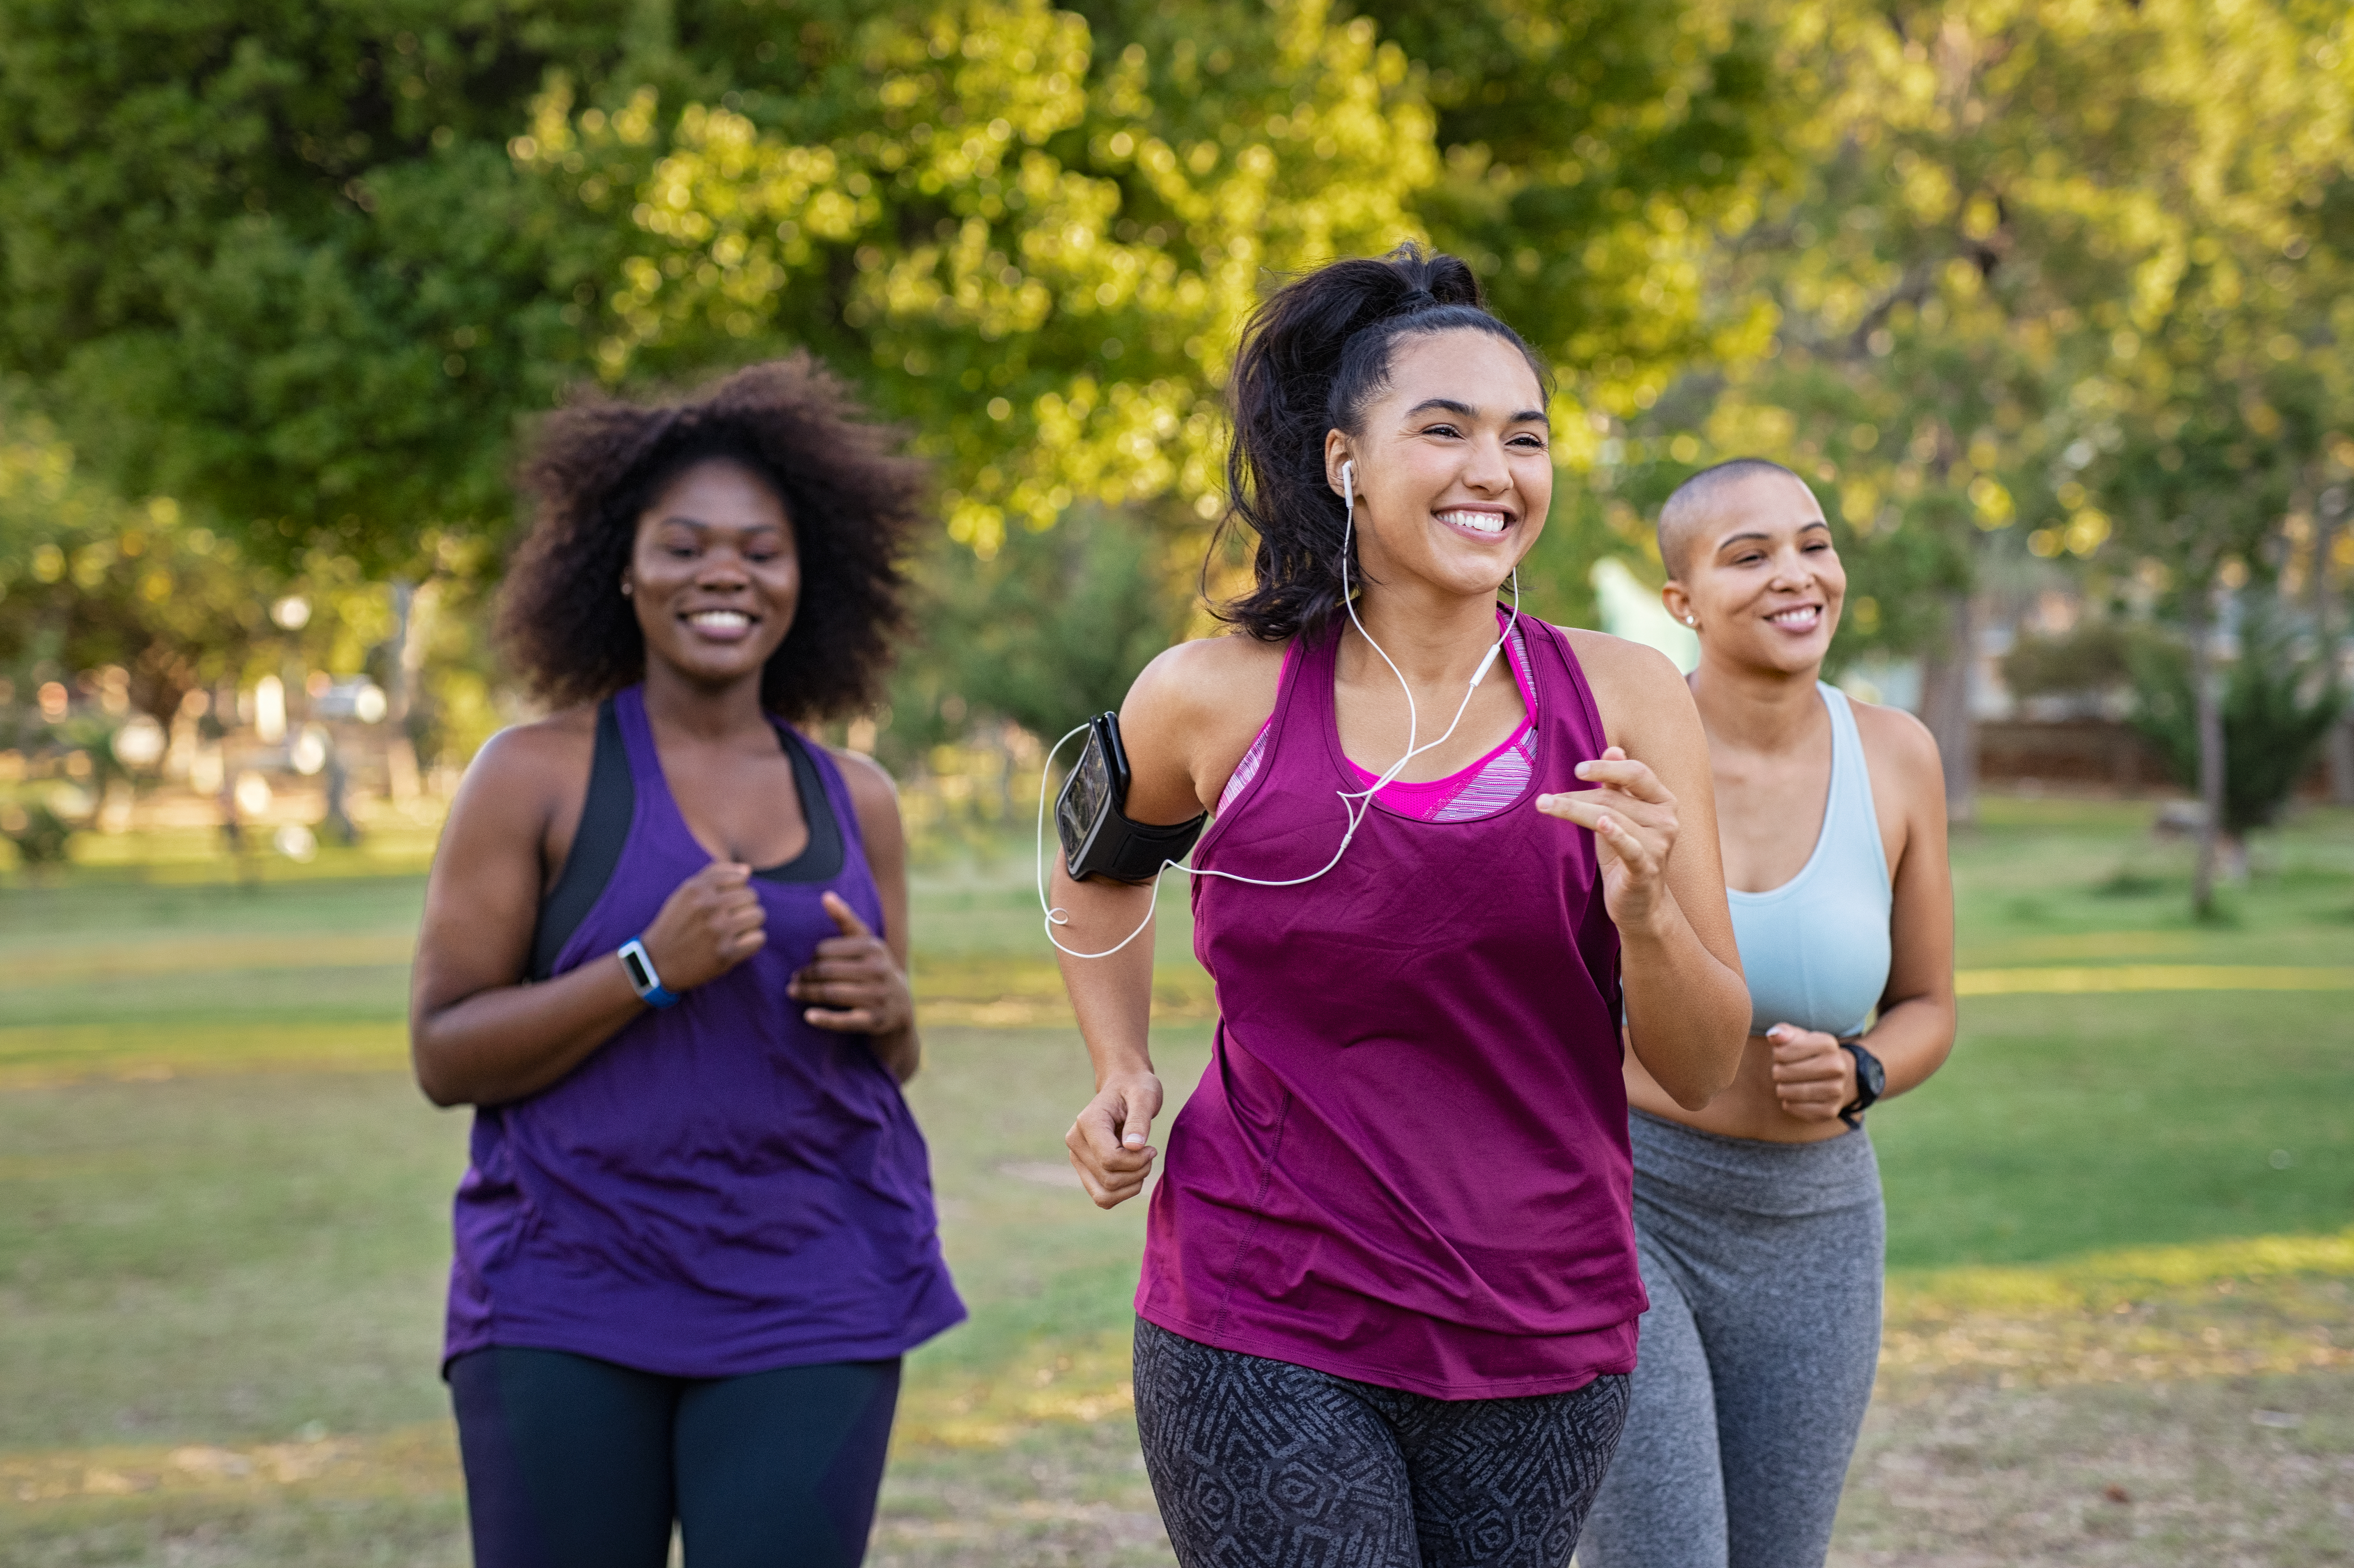 three women smiling while jogging in a park